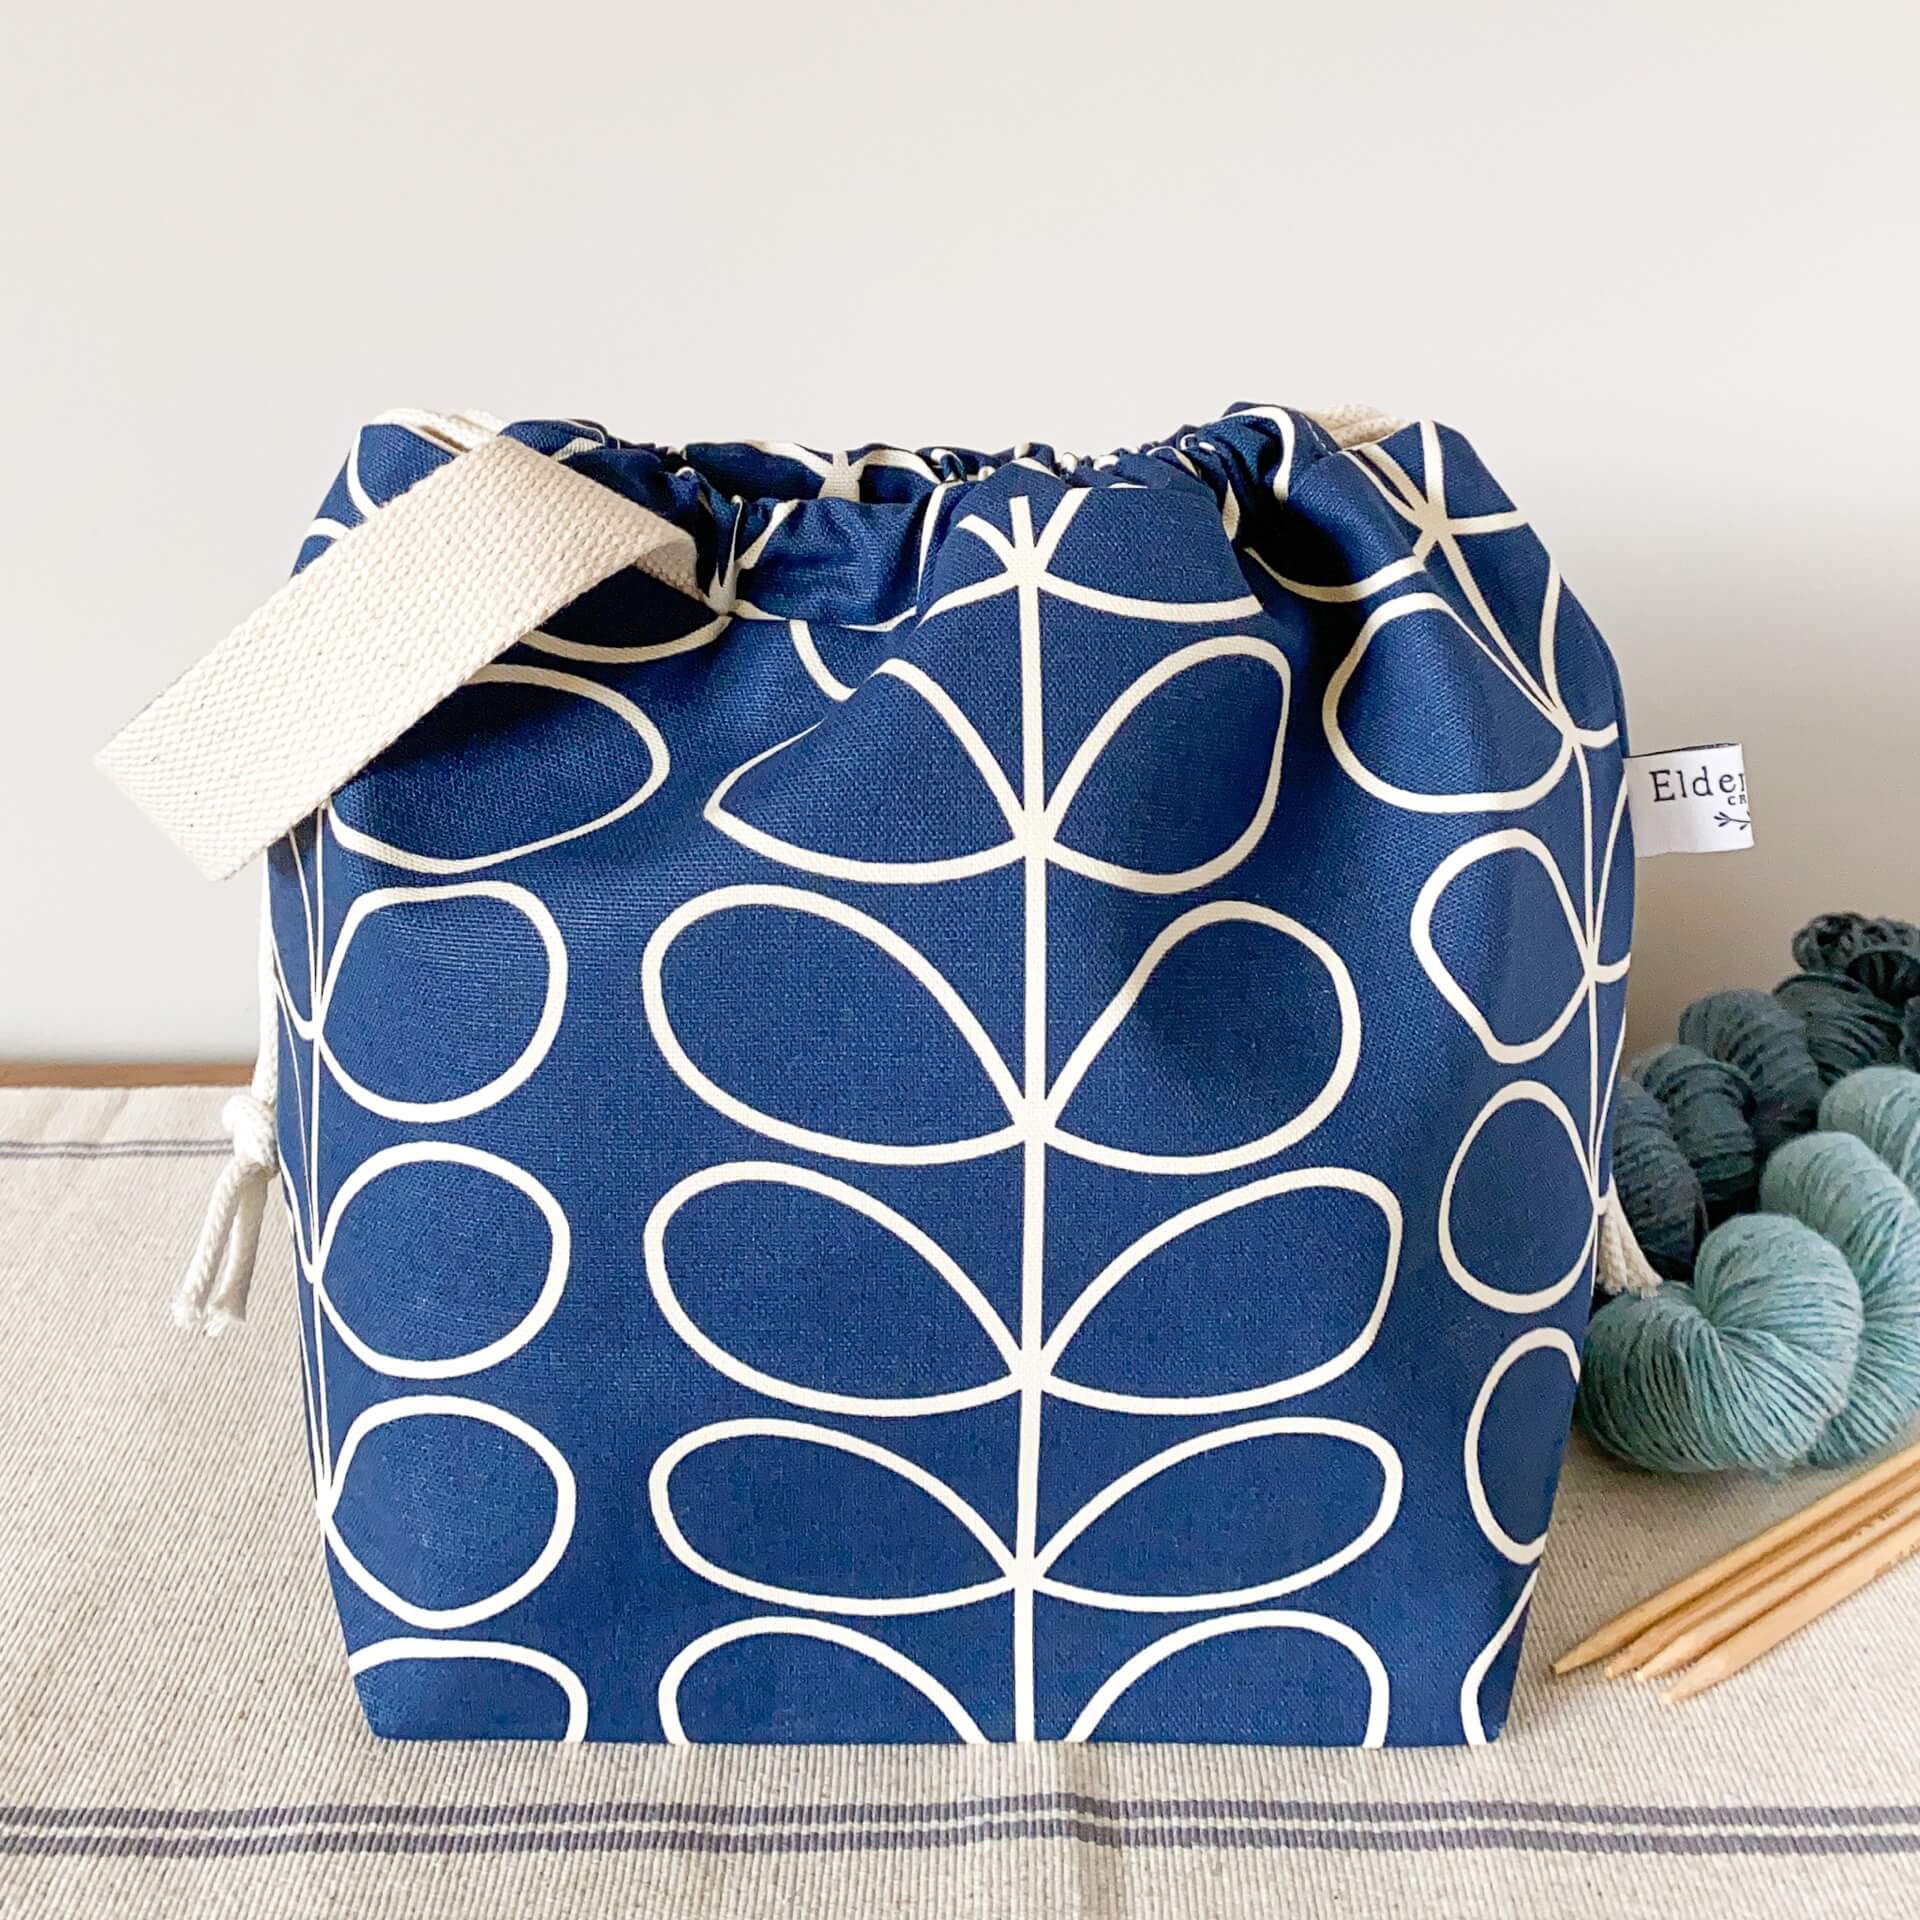 A large blue knitting project bag, pulled closed hiding its contents, sits in front of some yarn and knitting needles. 